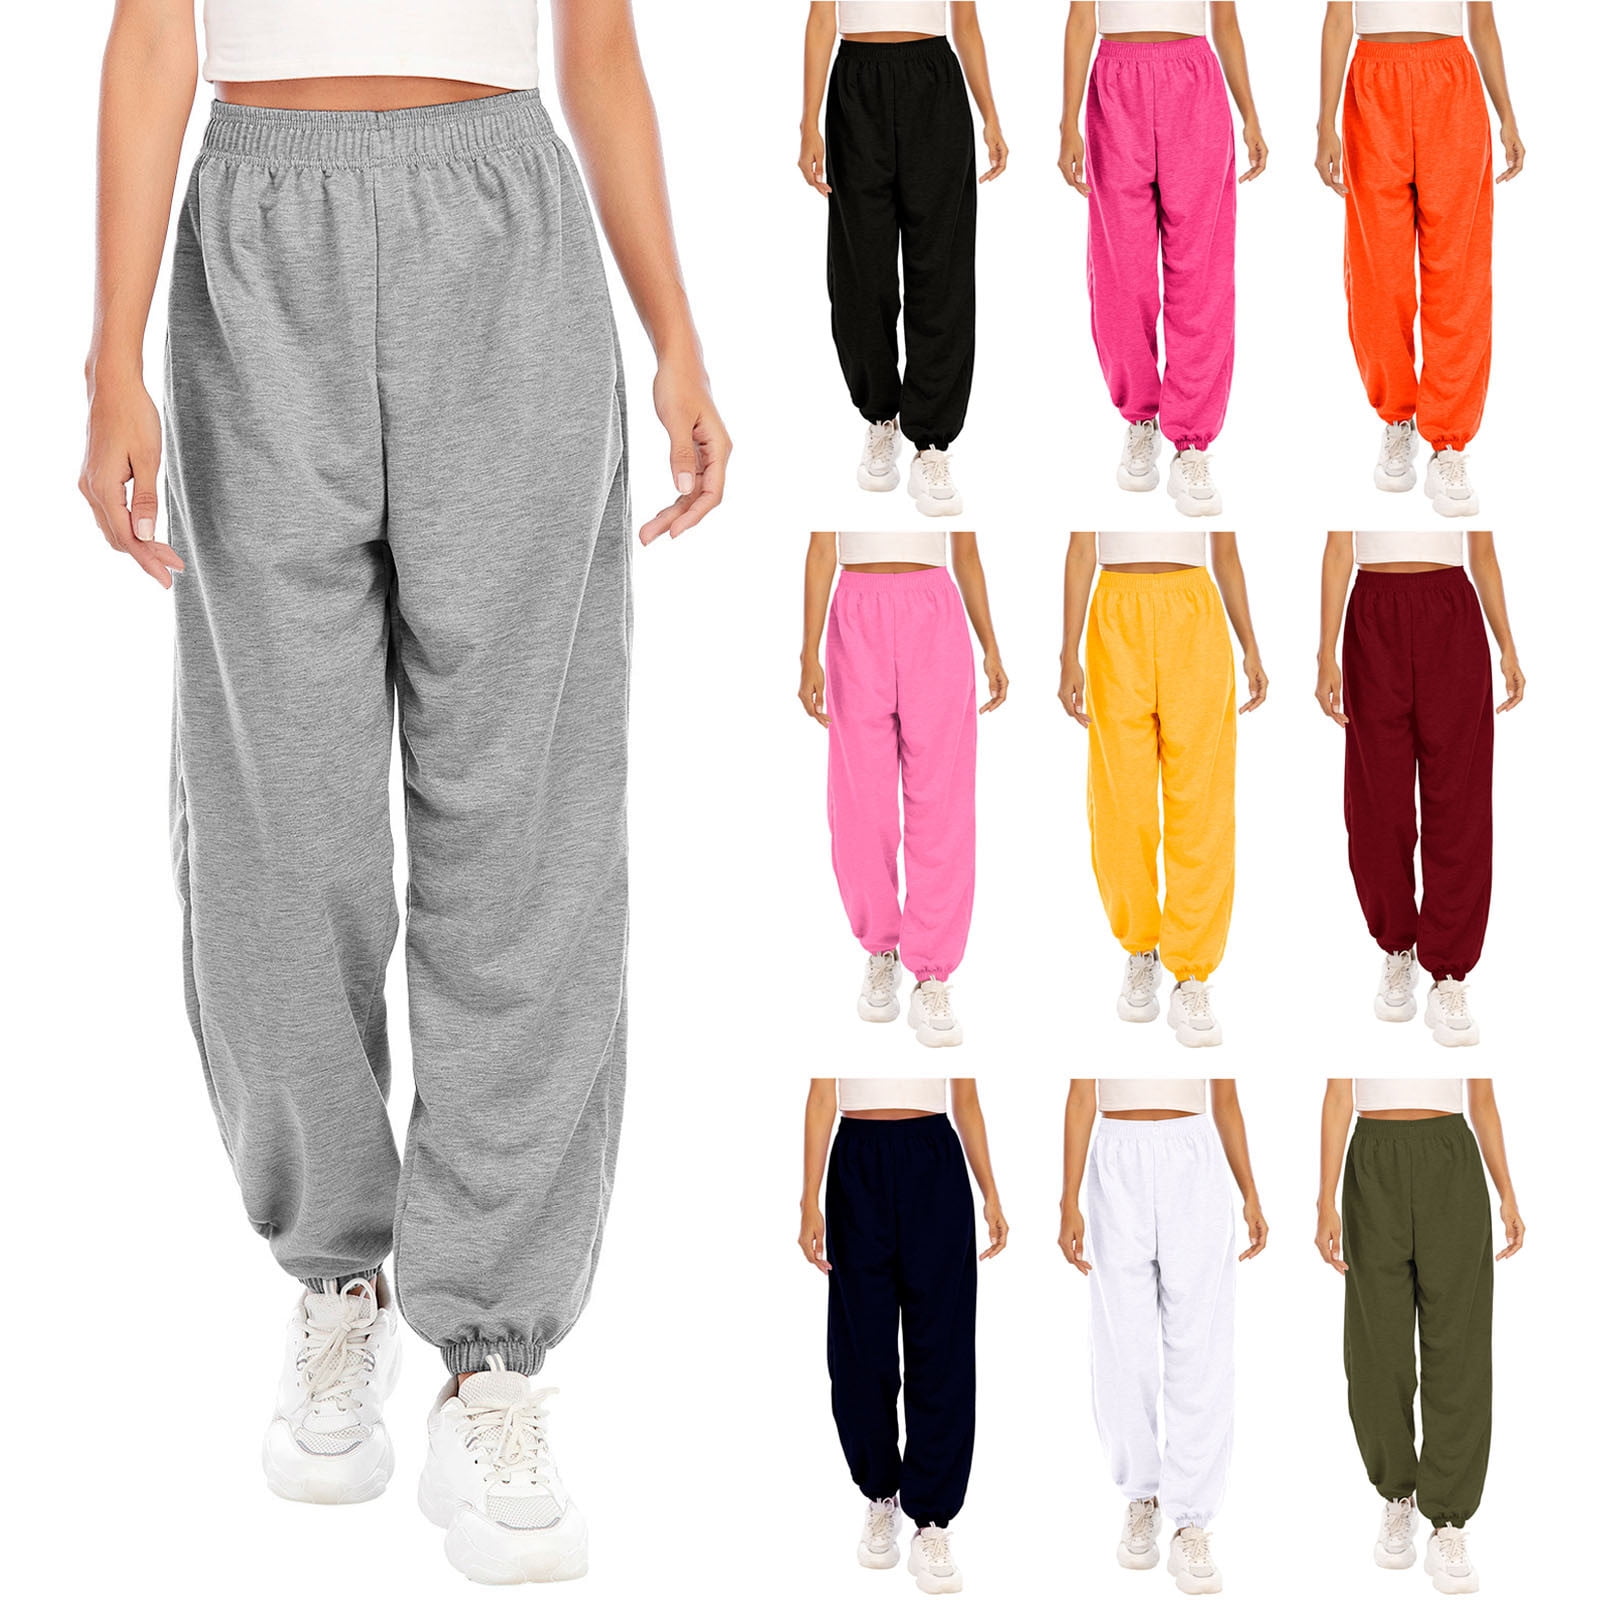 Jacenvly Sweatpants Women Clearance Bundle Foot Long Elastic Waisted  Drawstring Pocket Plain Trousers for Women Jogging Pants Casual Sweatpants  with Lounge Pants for Workout Running 